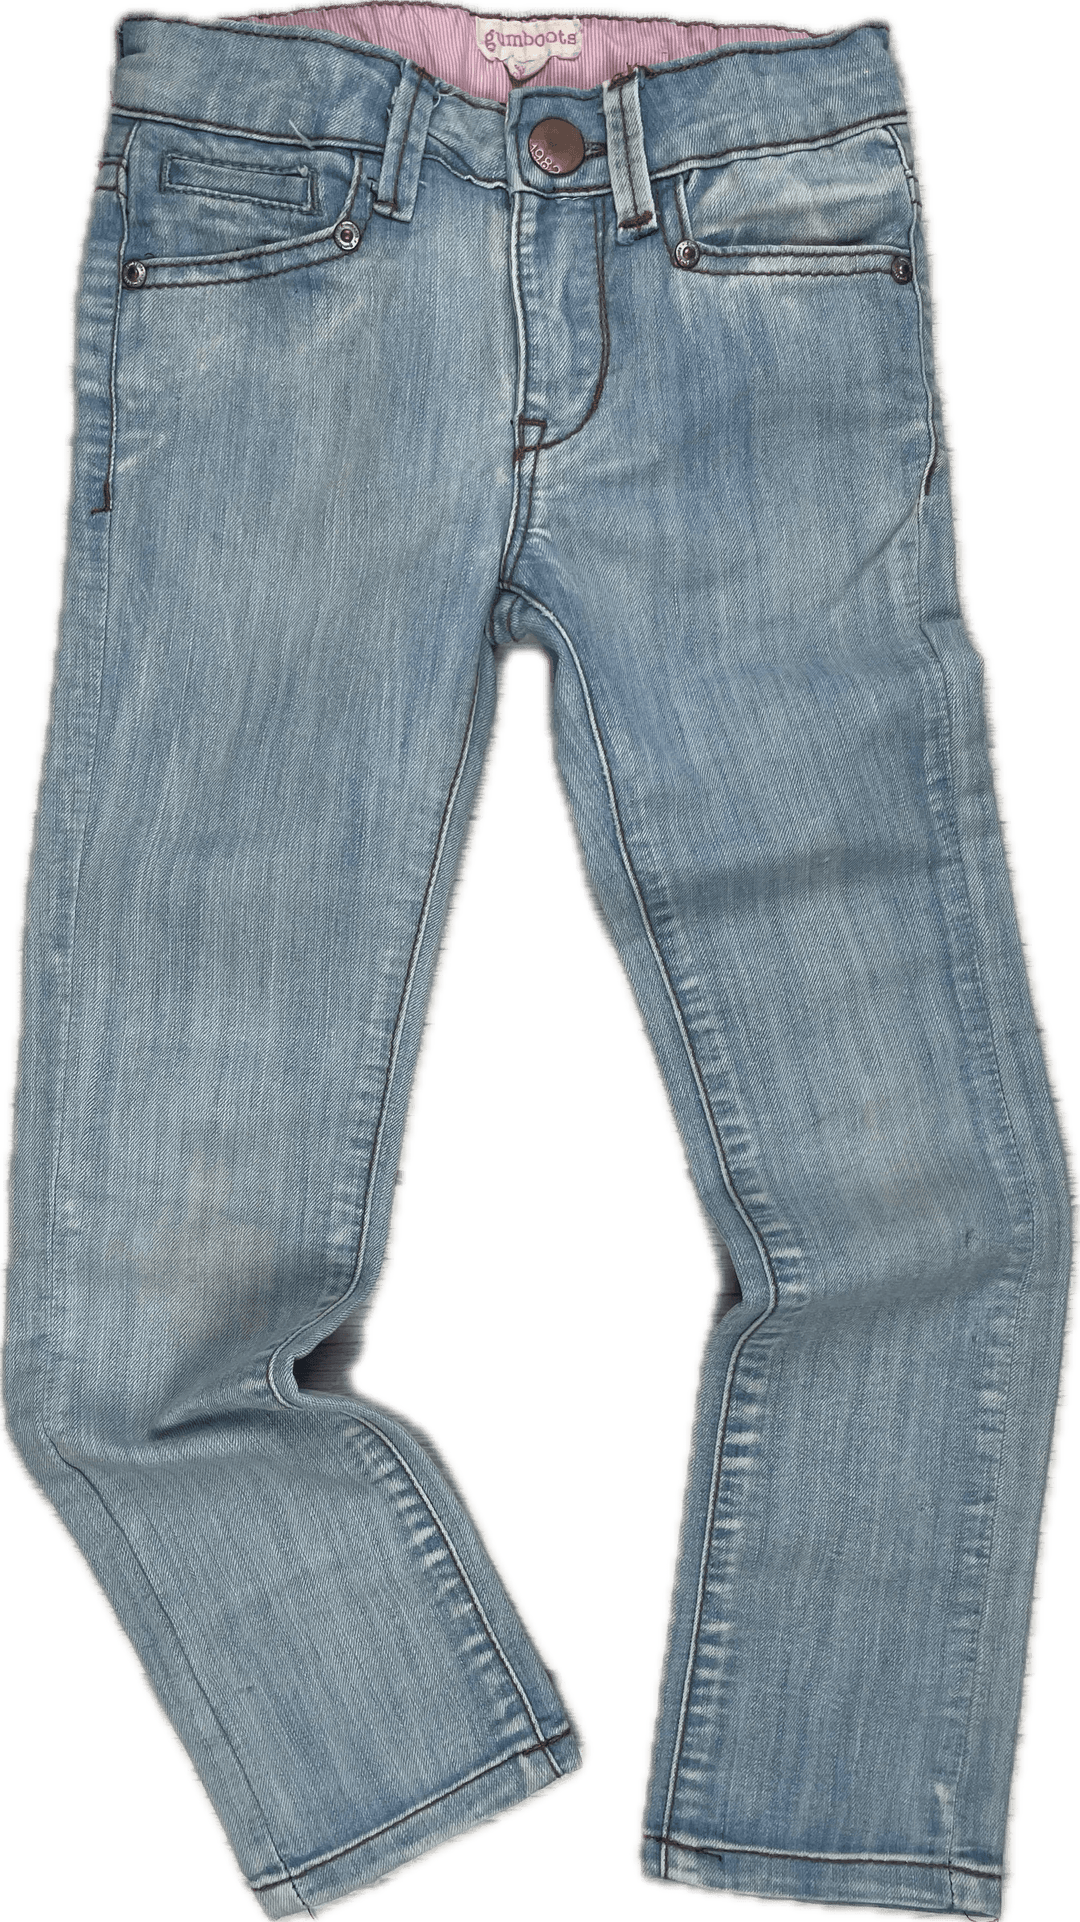 Gumboots Kids Light Wash Slim Straight Jeans - Size 6/7Y - Jean Pool